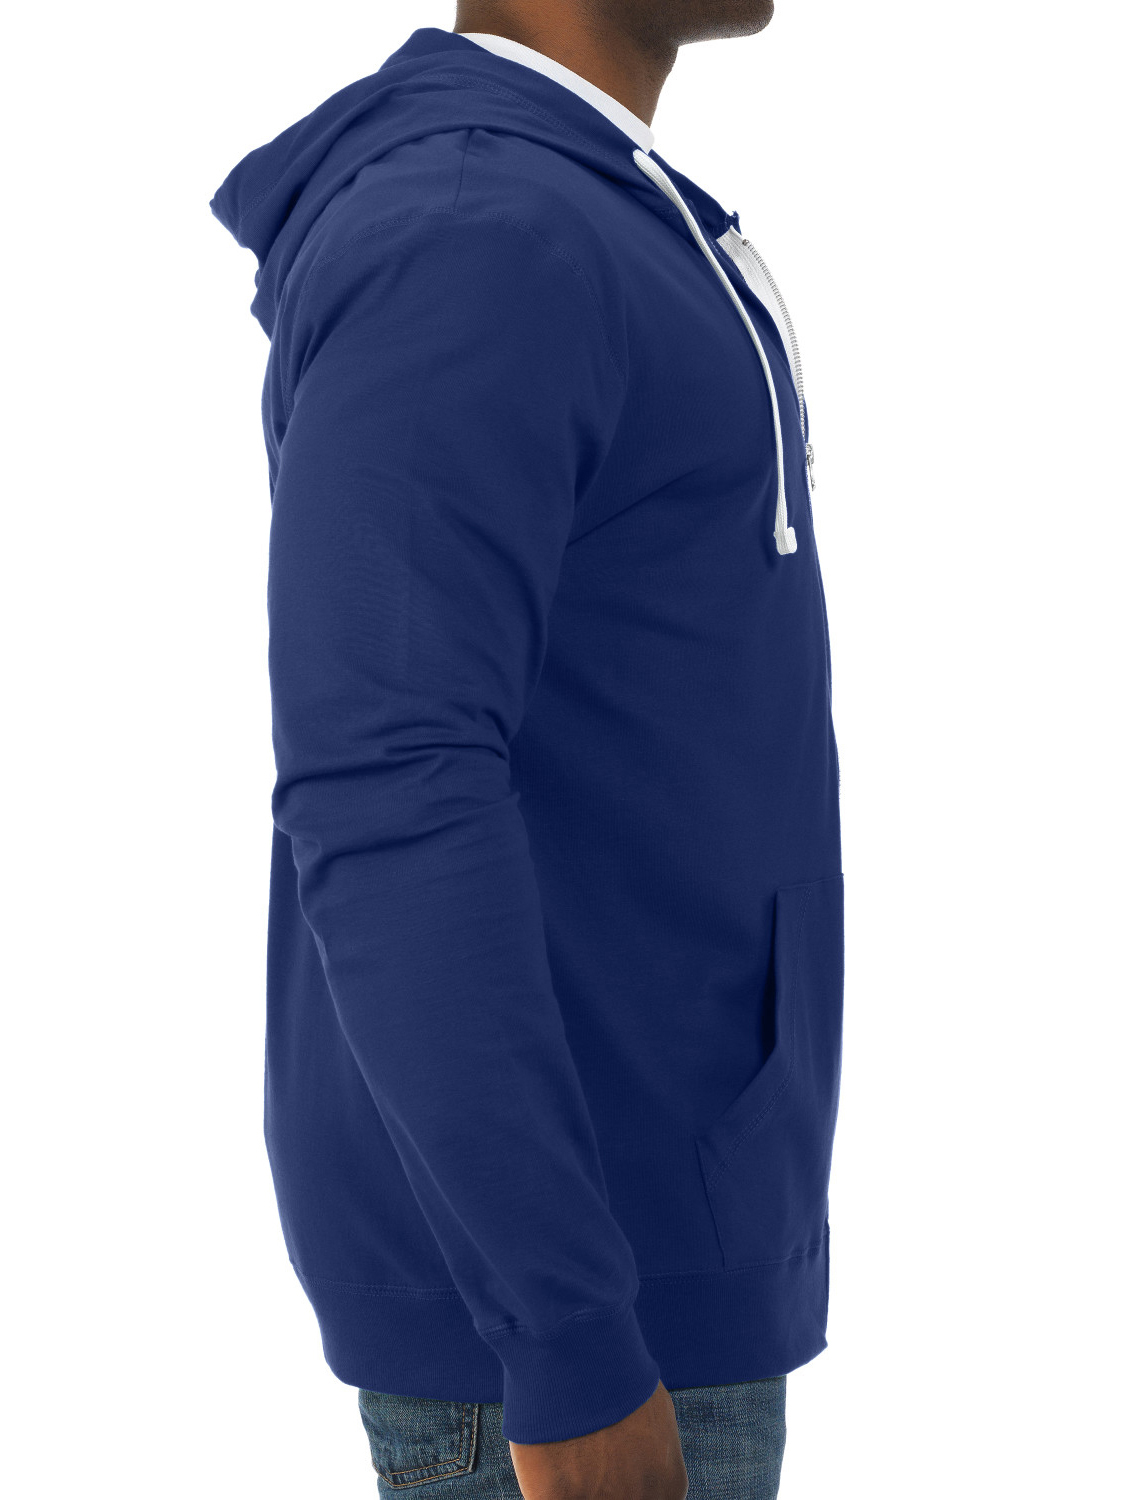 Fruit of the loom Men's and Big Men's Soft Jersey Full Zip Hooded Jacket - image 4 of 6